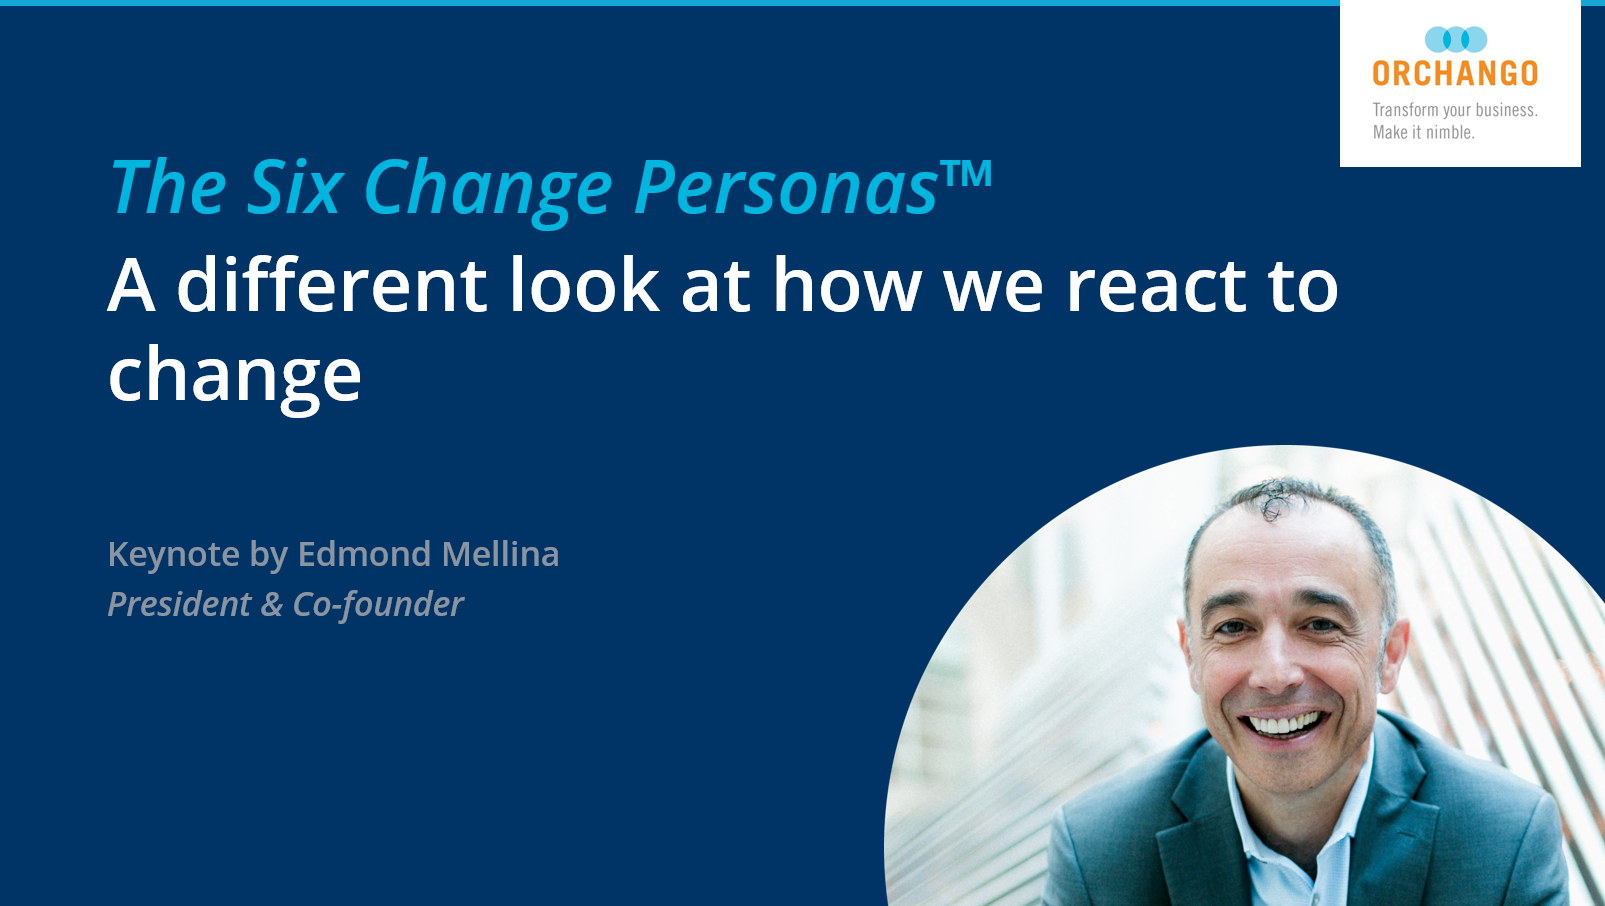 Keynote by Edmond Mellina - The Six Change Personas™ (for everyone)